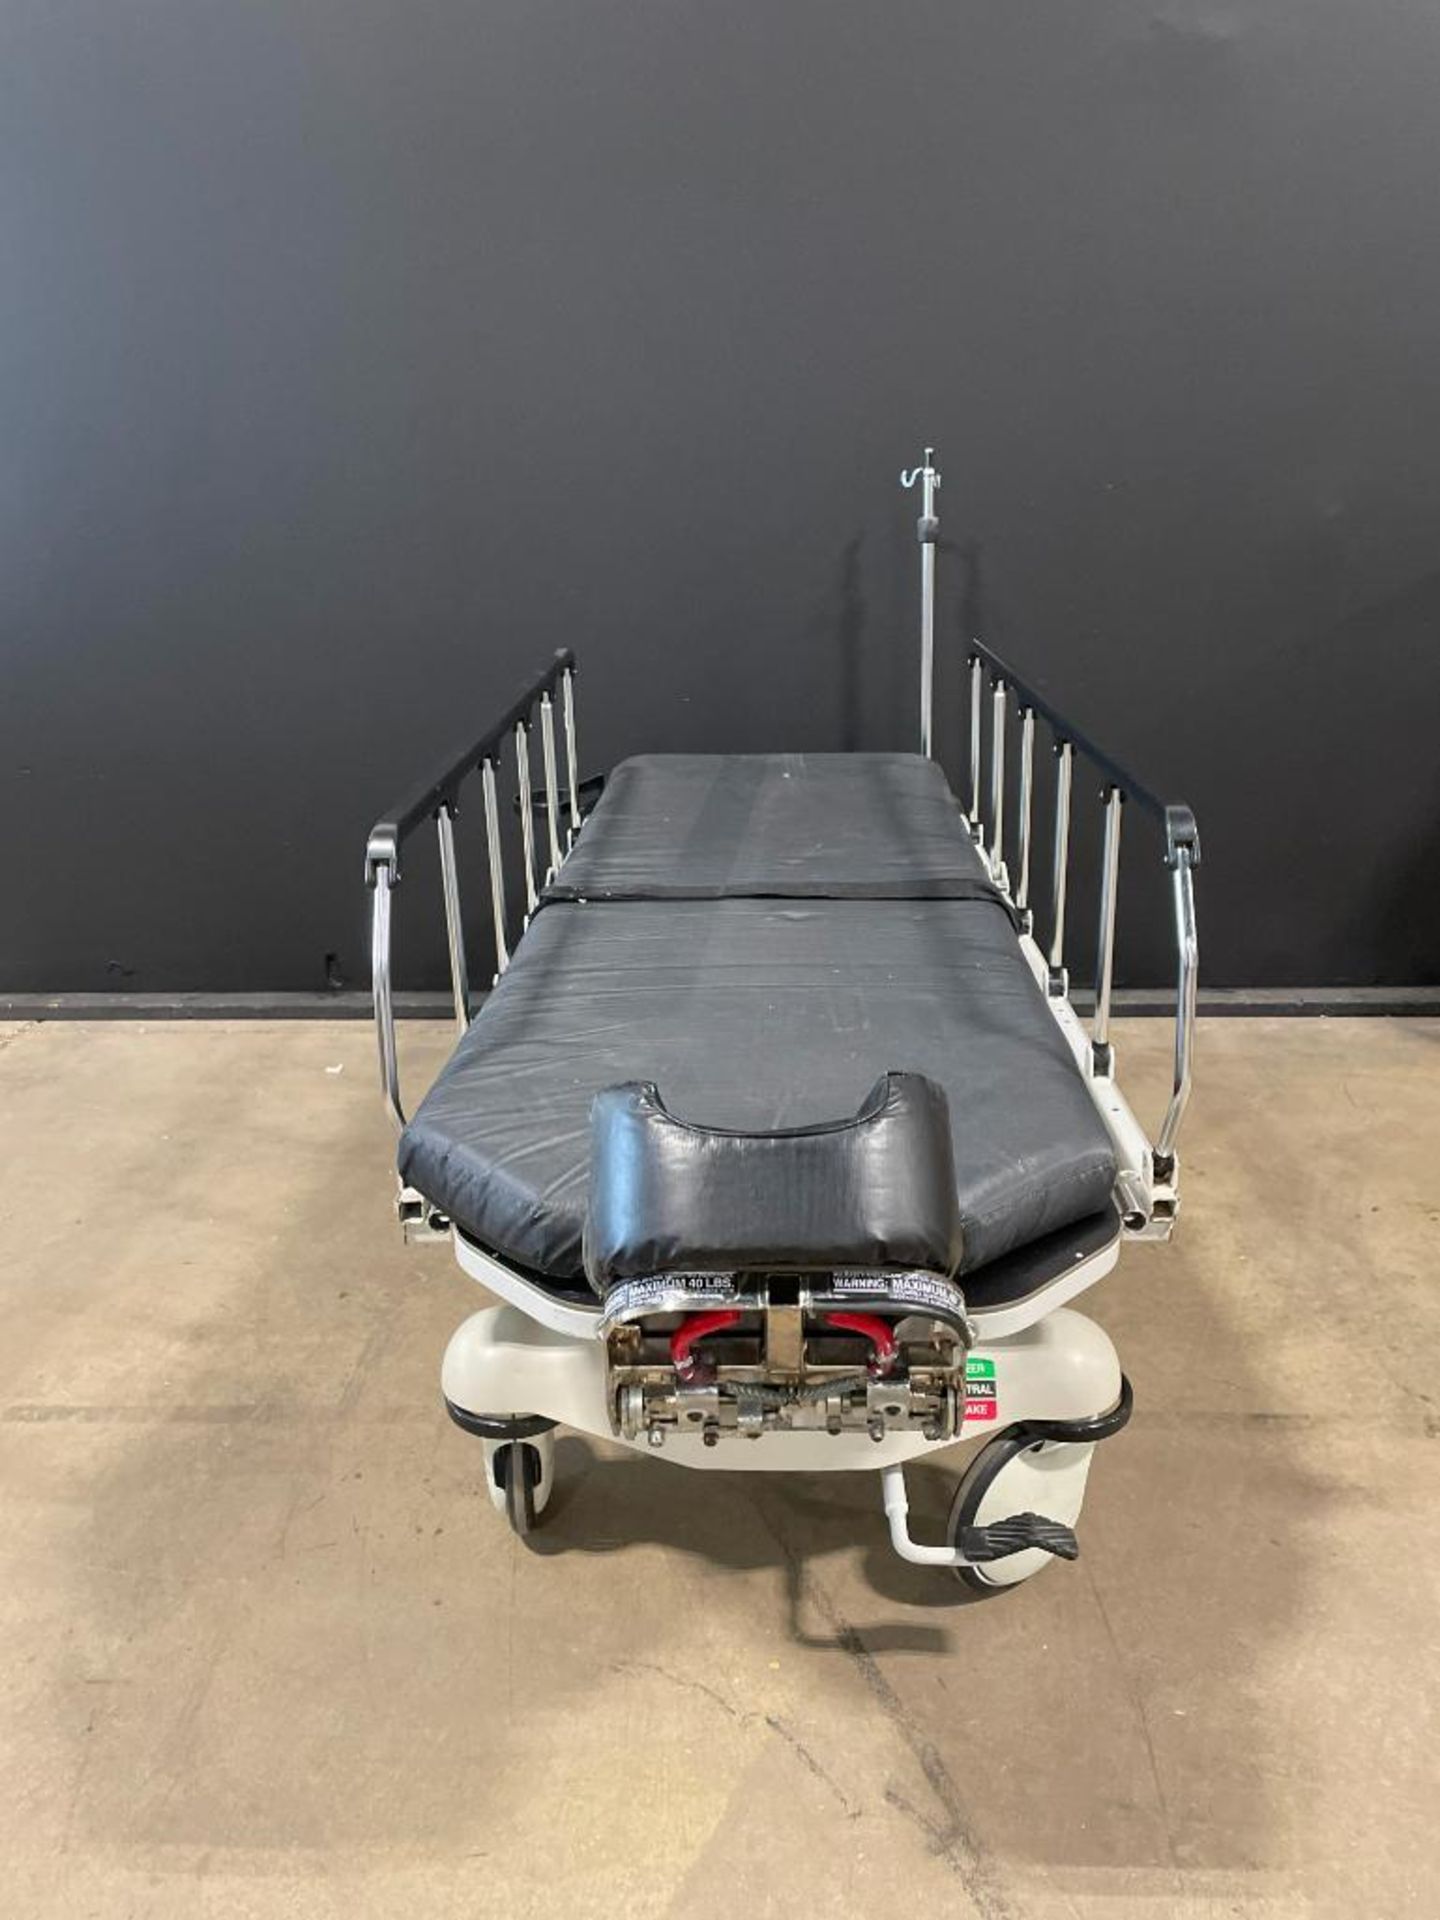 STRYKER 1068 HEAD & NECK STRETCHER WITH ARTICULATING HEADREST - Image 4 of 4